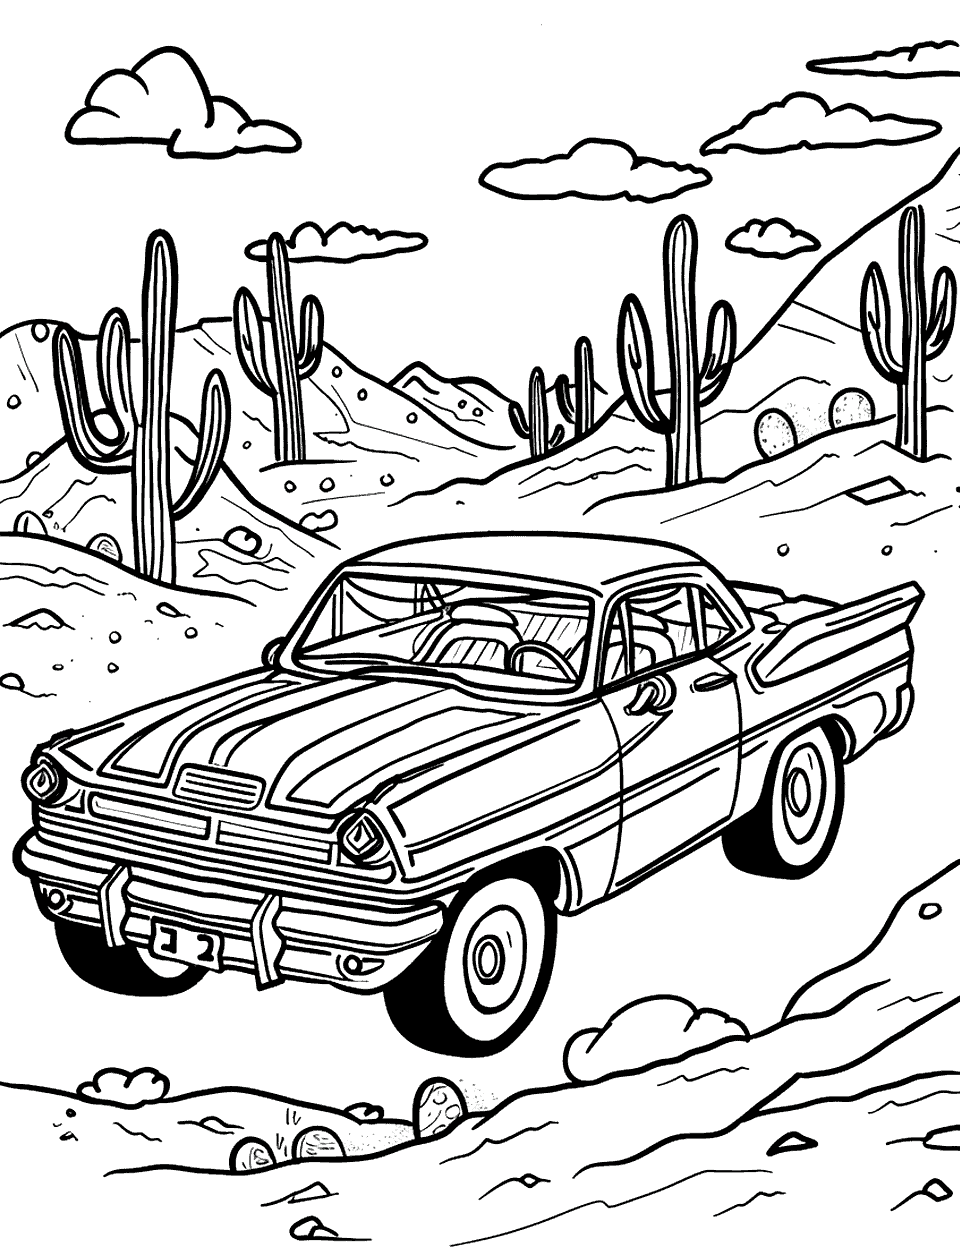 Wild West Road Trip Coloring Page - A Hot Wheels car cruising through a desert with cacti.